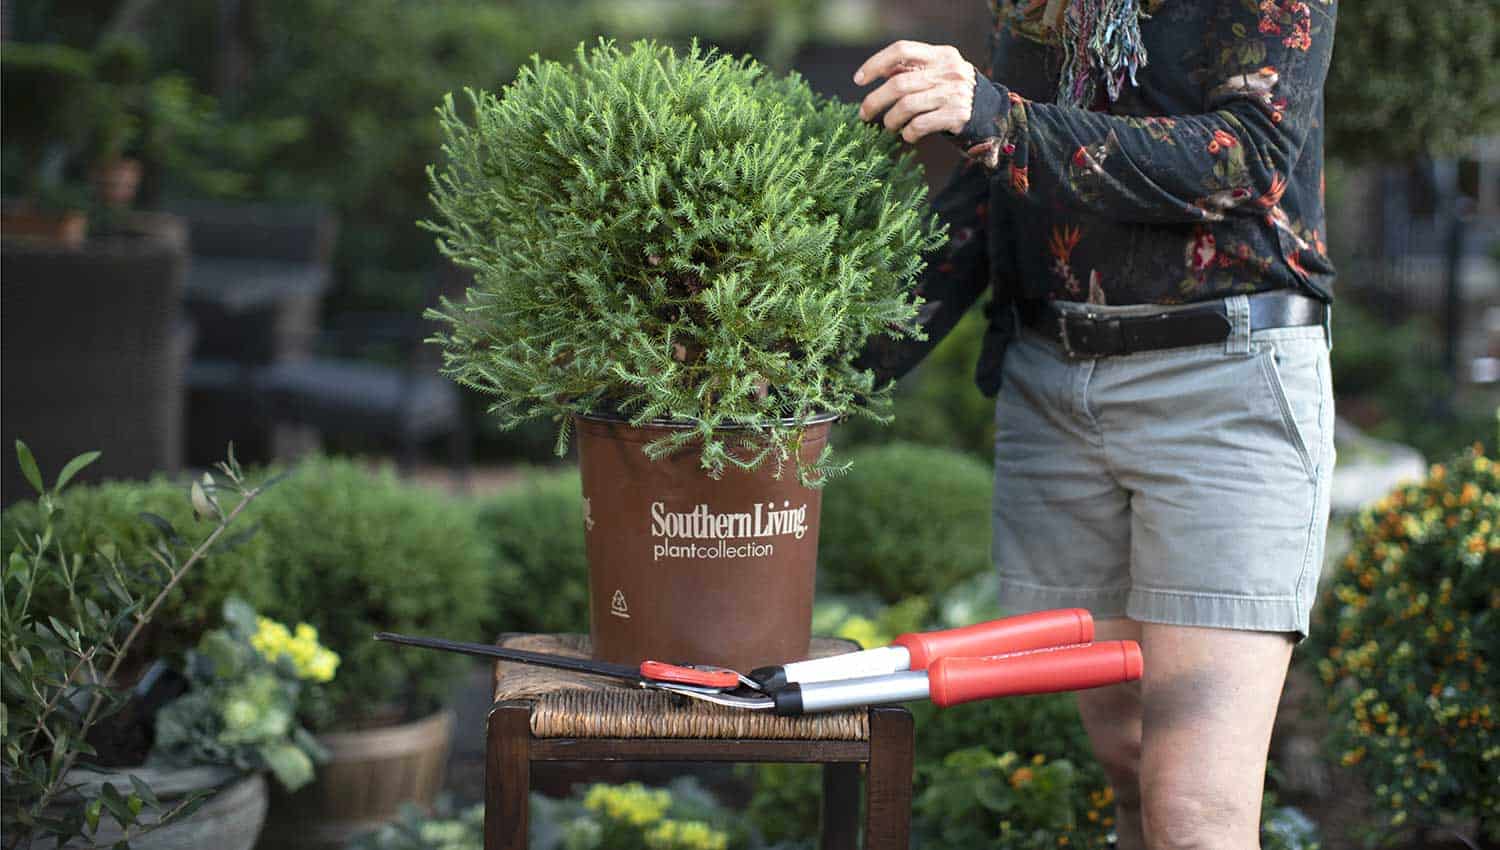 Linda Vater prepares to create a topiary from Pancake Arborvitae as it sits on a stool, in its brown Southern Living plastic pot with a pair of red shears in the foreground